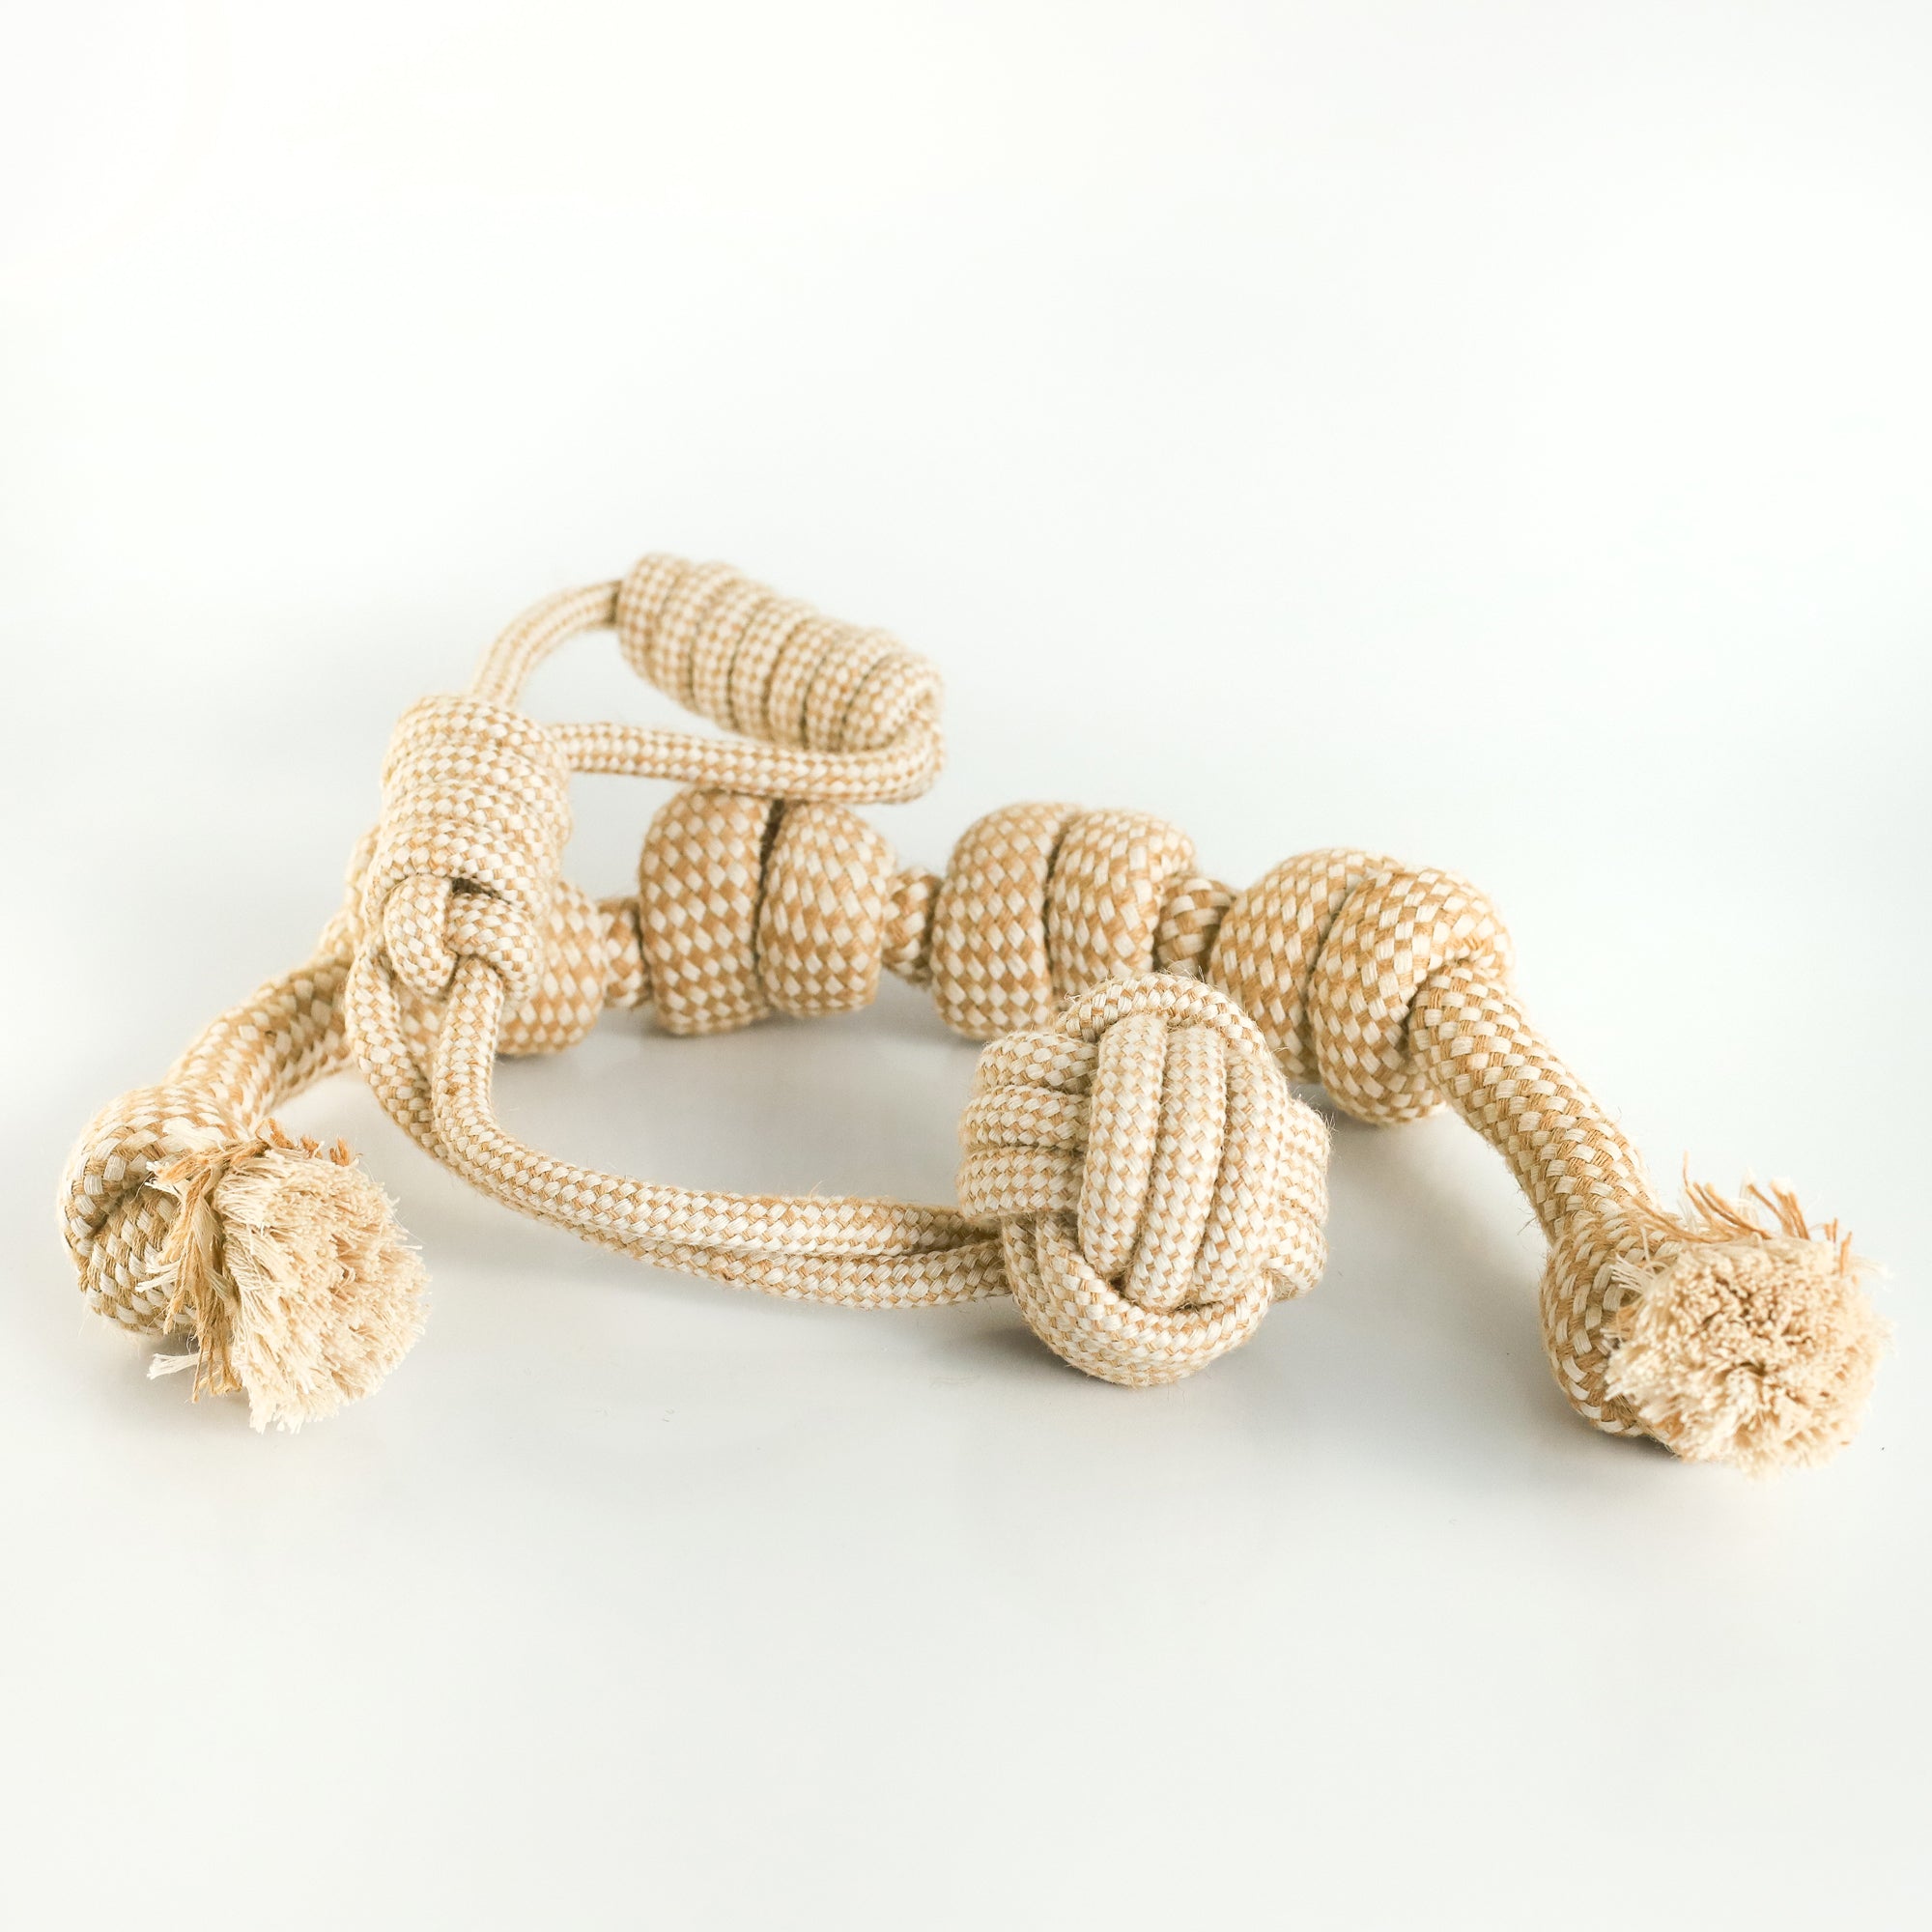 Hemp Rope Toys The Life of Riley  The Life of Riley